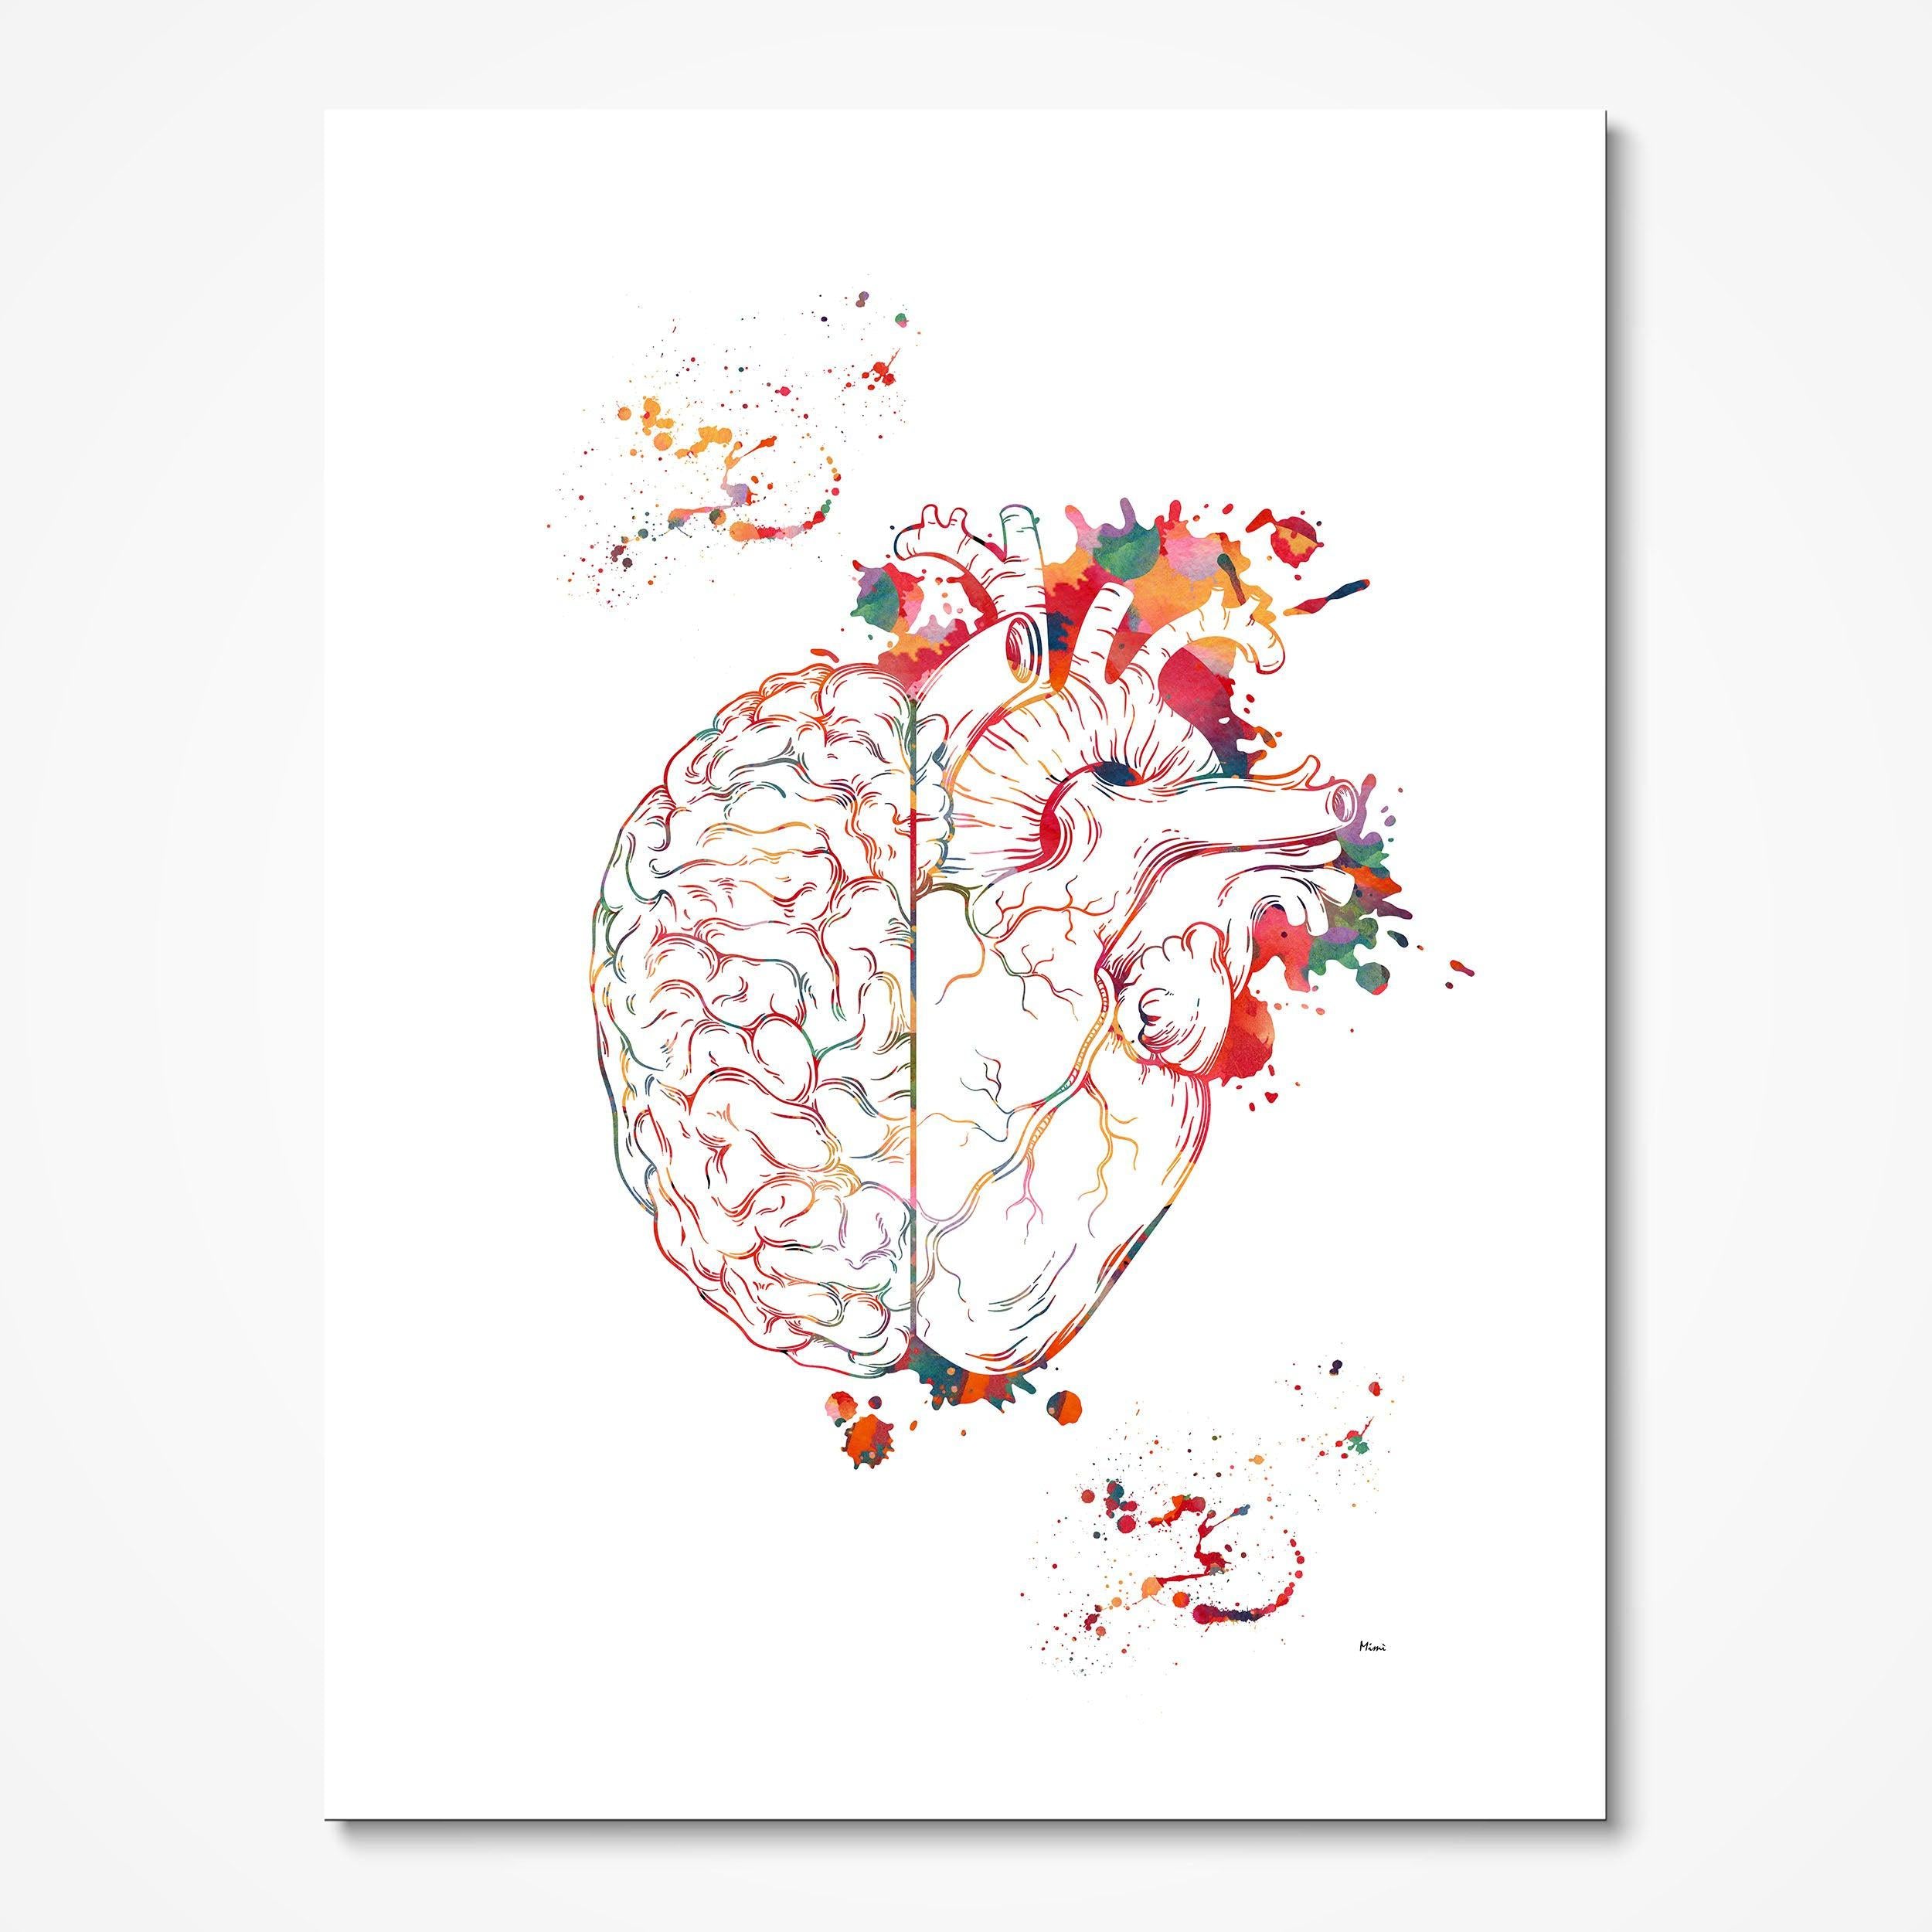 Heart And Brain Balance Print Brain And Heart Poster Cognitive Psychology Illustration Follow Your Heart vs Follow Your Brain